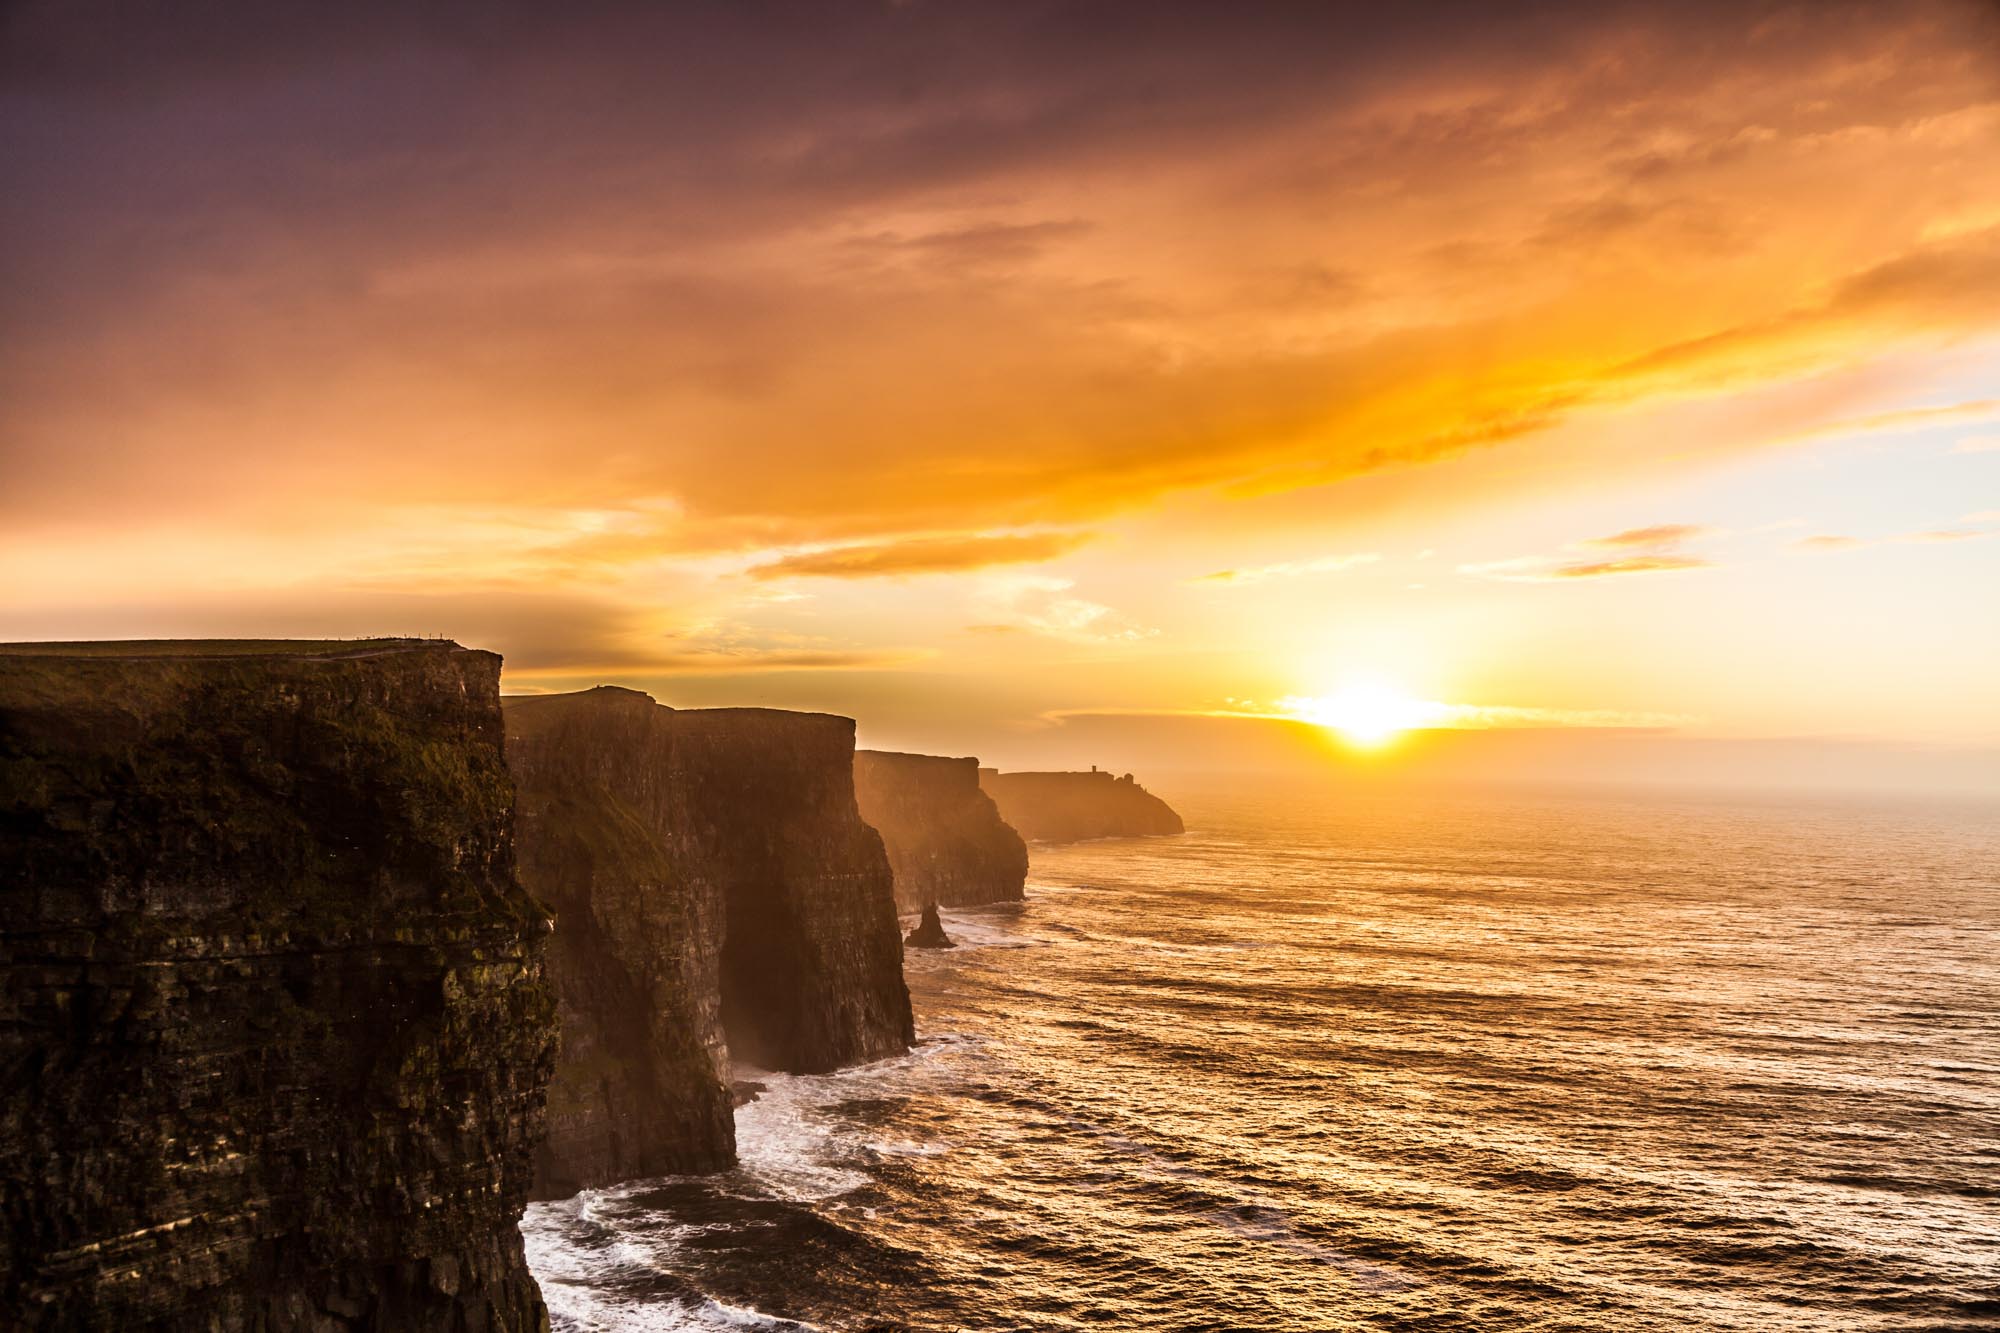 Cliffs Of Moher At Sunset In Co. Clare, Ireland Europe